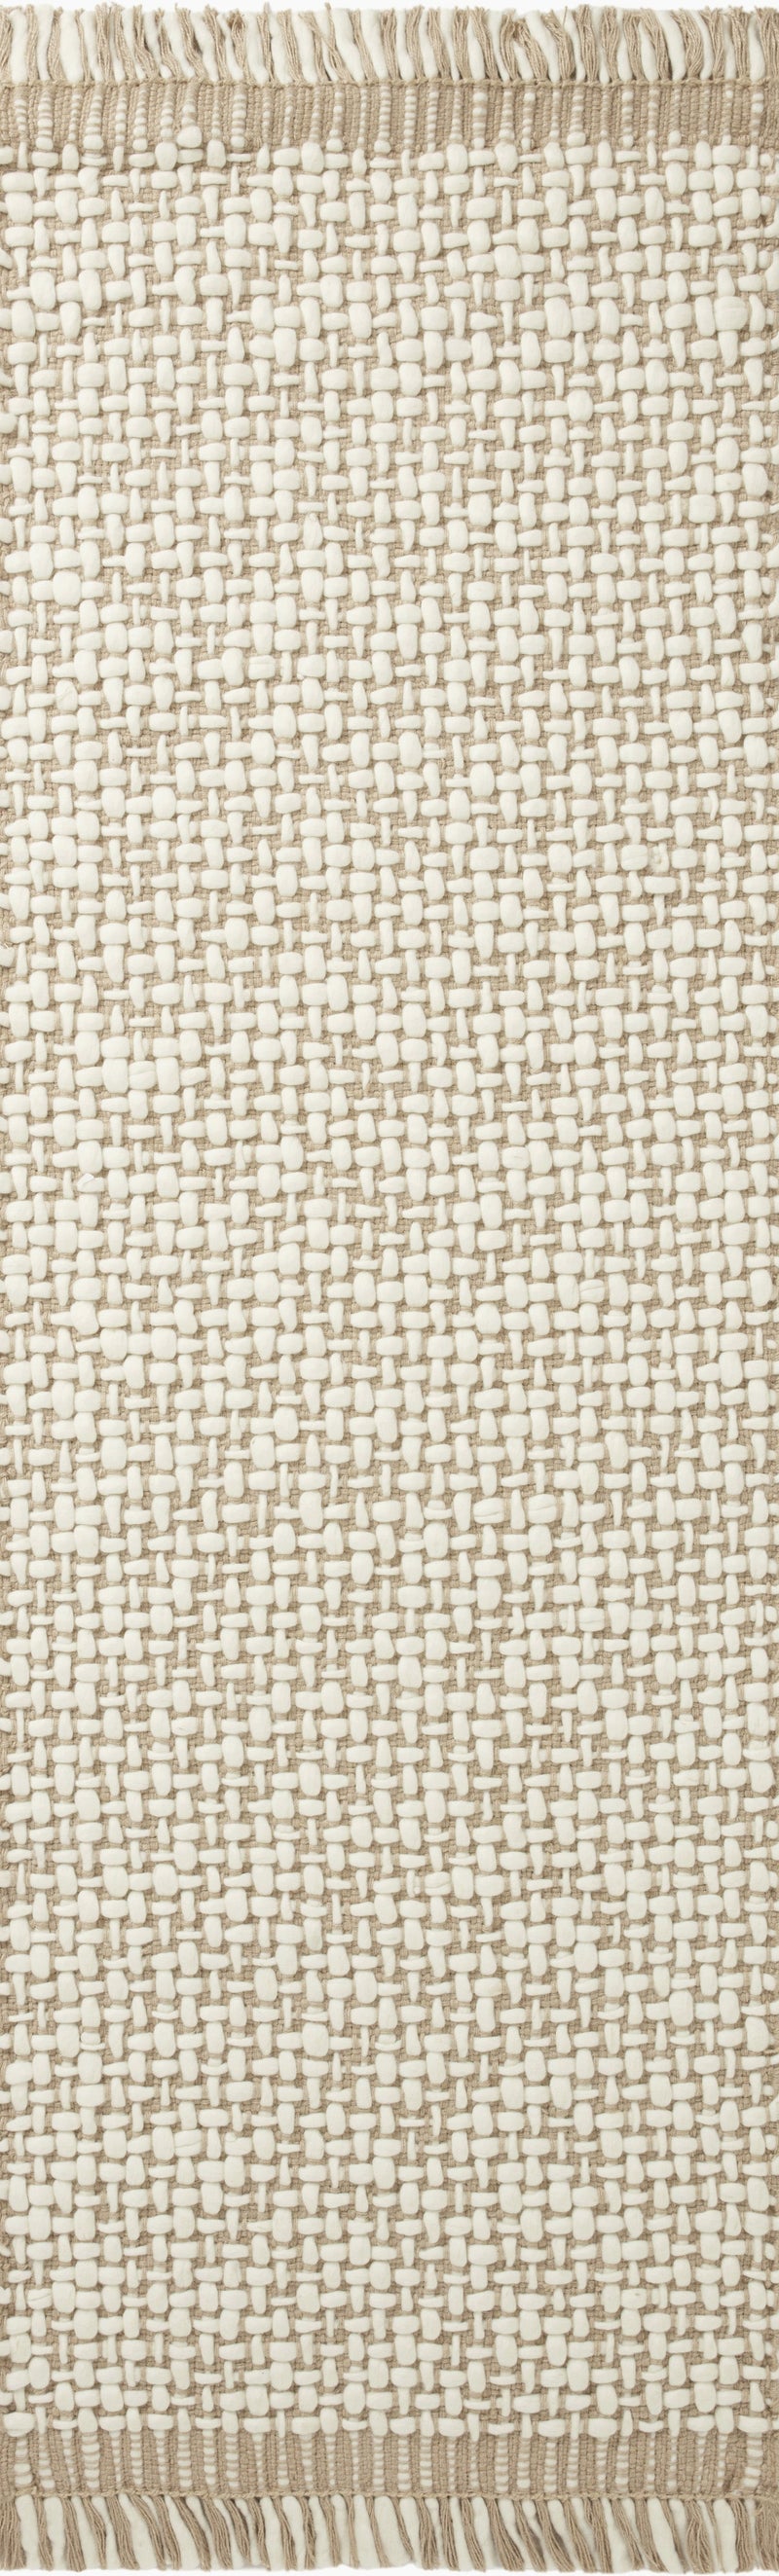 media image for Yellowstone Hand Woven Natural Ivory Rug By Amber Lewis X Loloi Yeloyel 01Naivb6F0 2 298